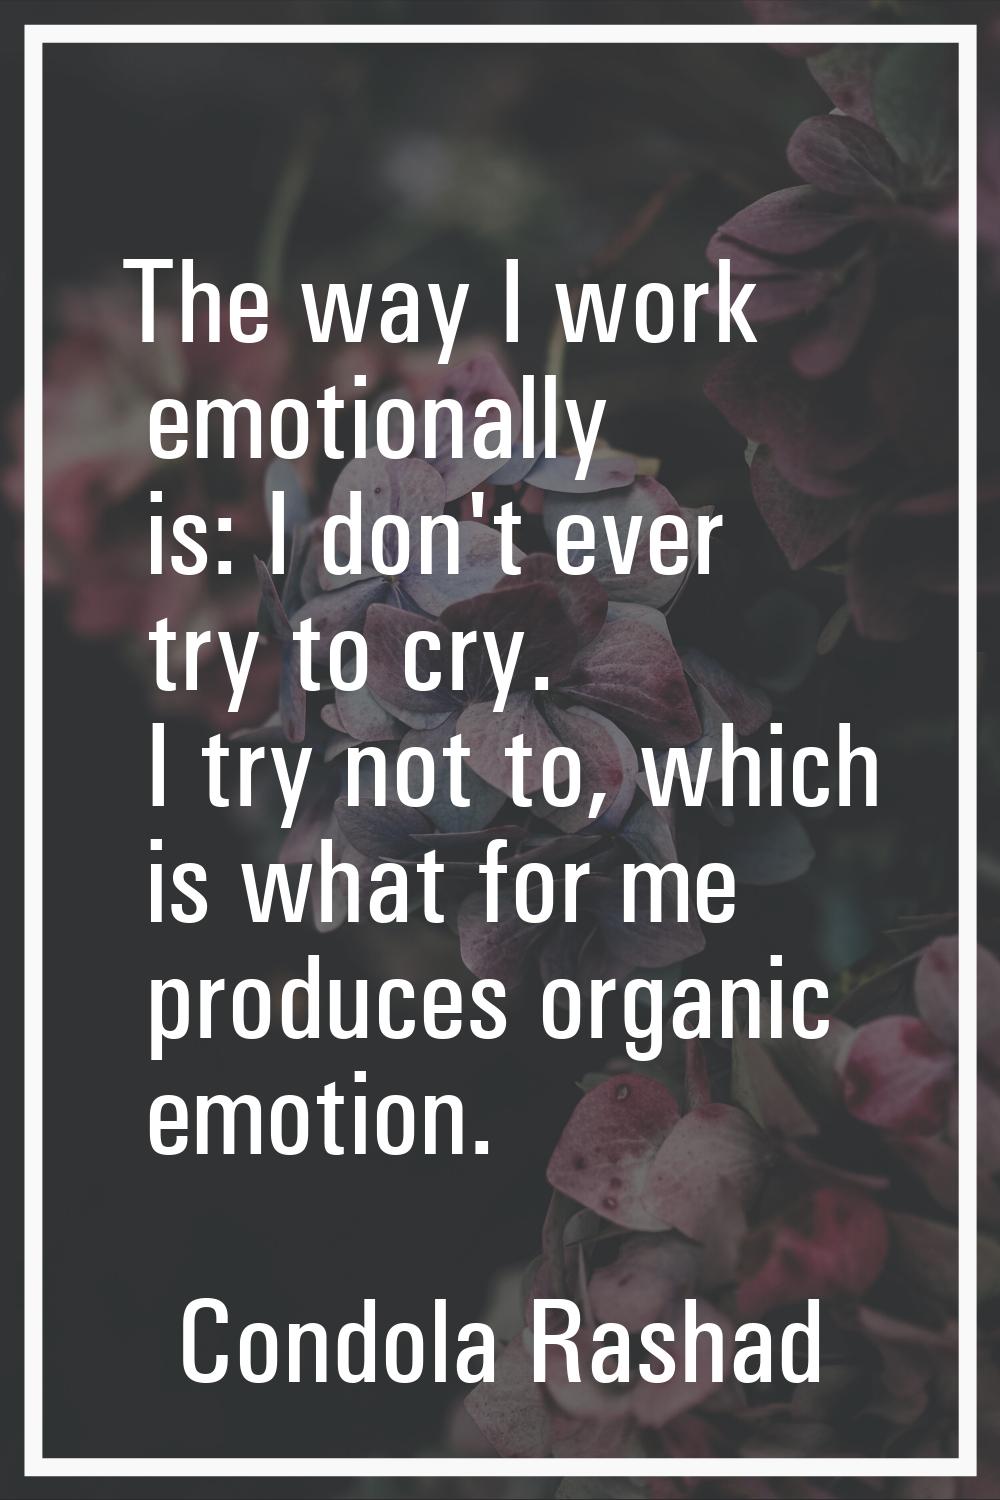 The way I work emotionally is: I don't ever try to cry. I try not to, which is what for me produces